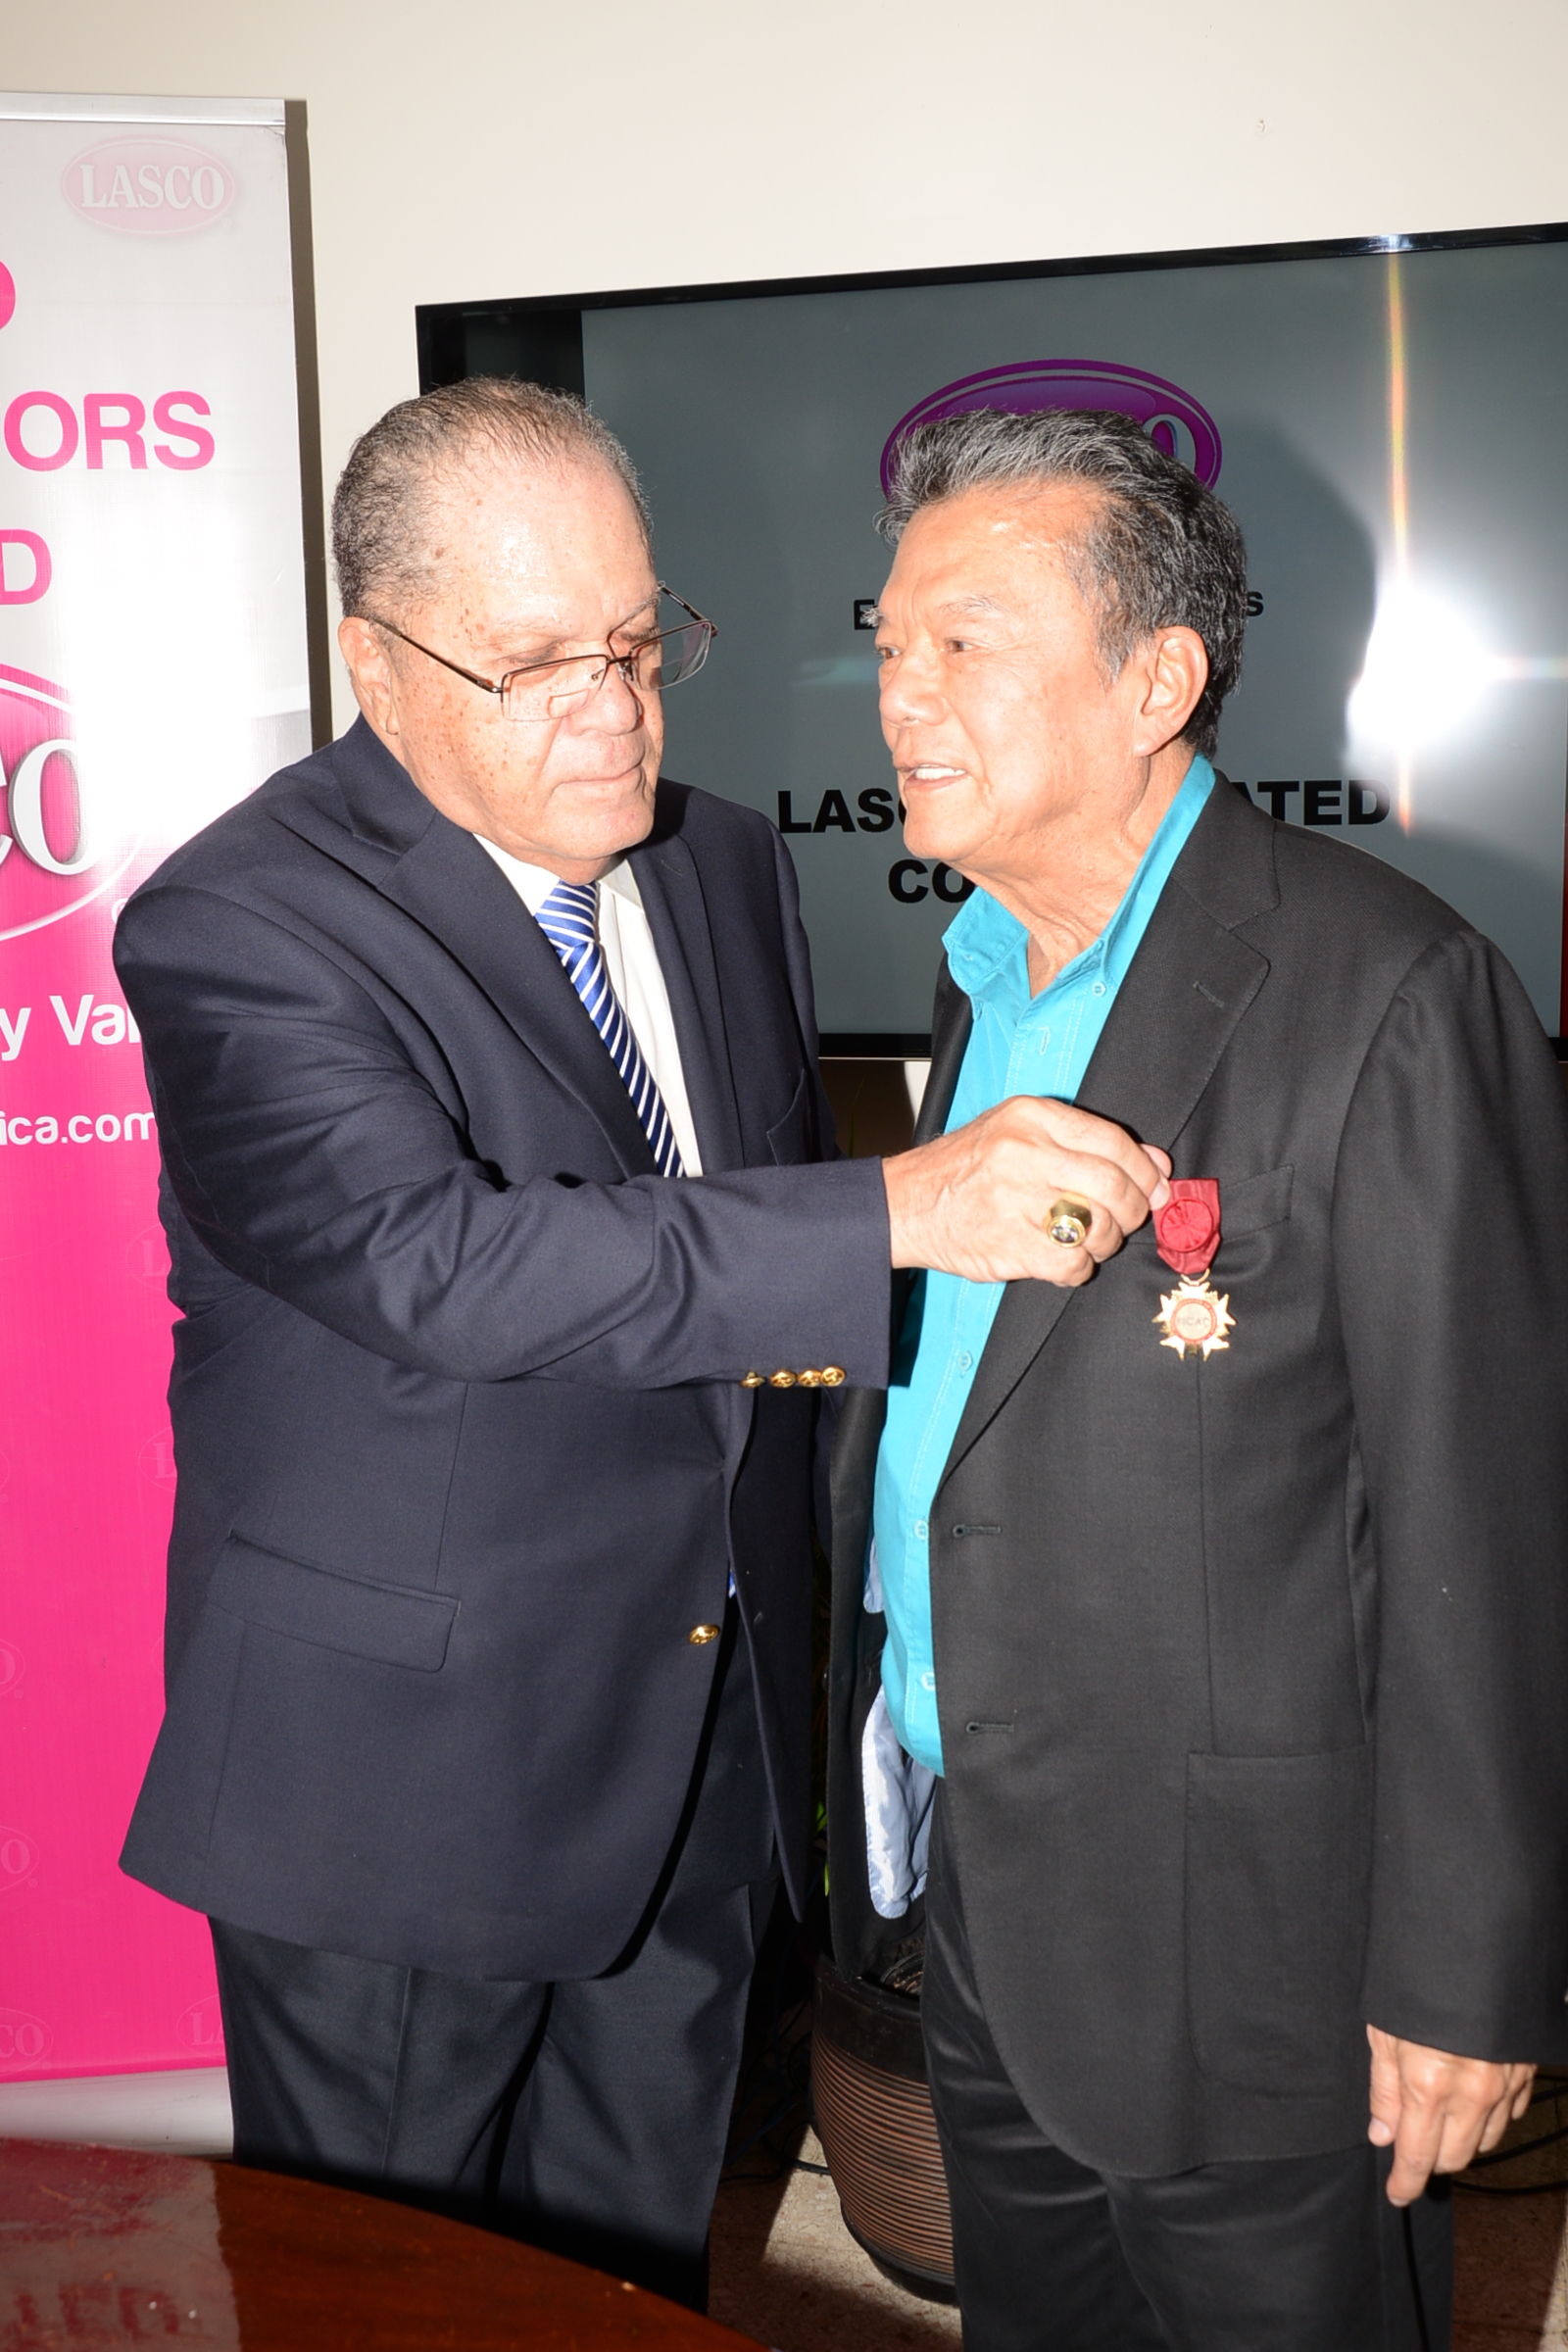 Dr. the Hon. Arnold Foote (left), President of The World Federation of Consuls confers the International Federation of Consular Associations (FICAC) Medal of Distinction on the Hon. Lascelles Chin, Fo